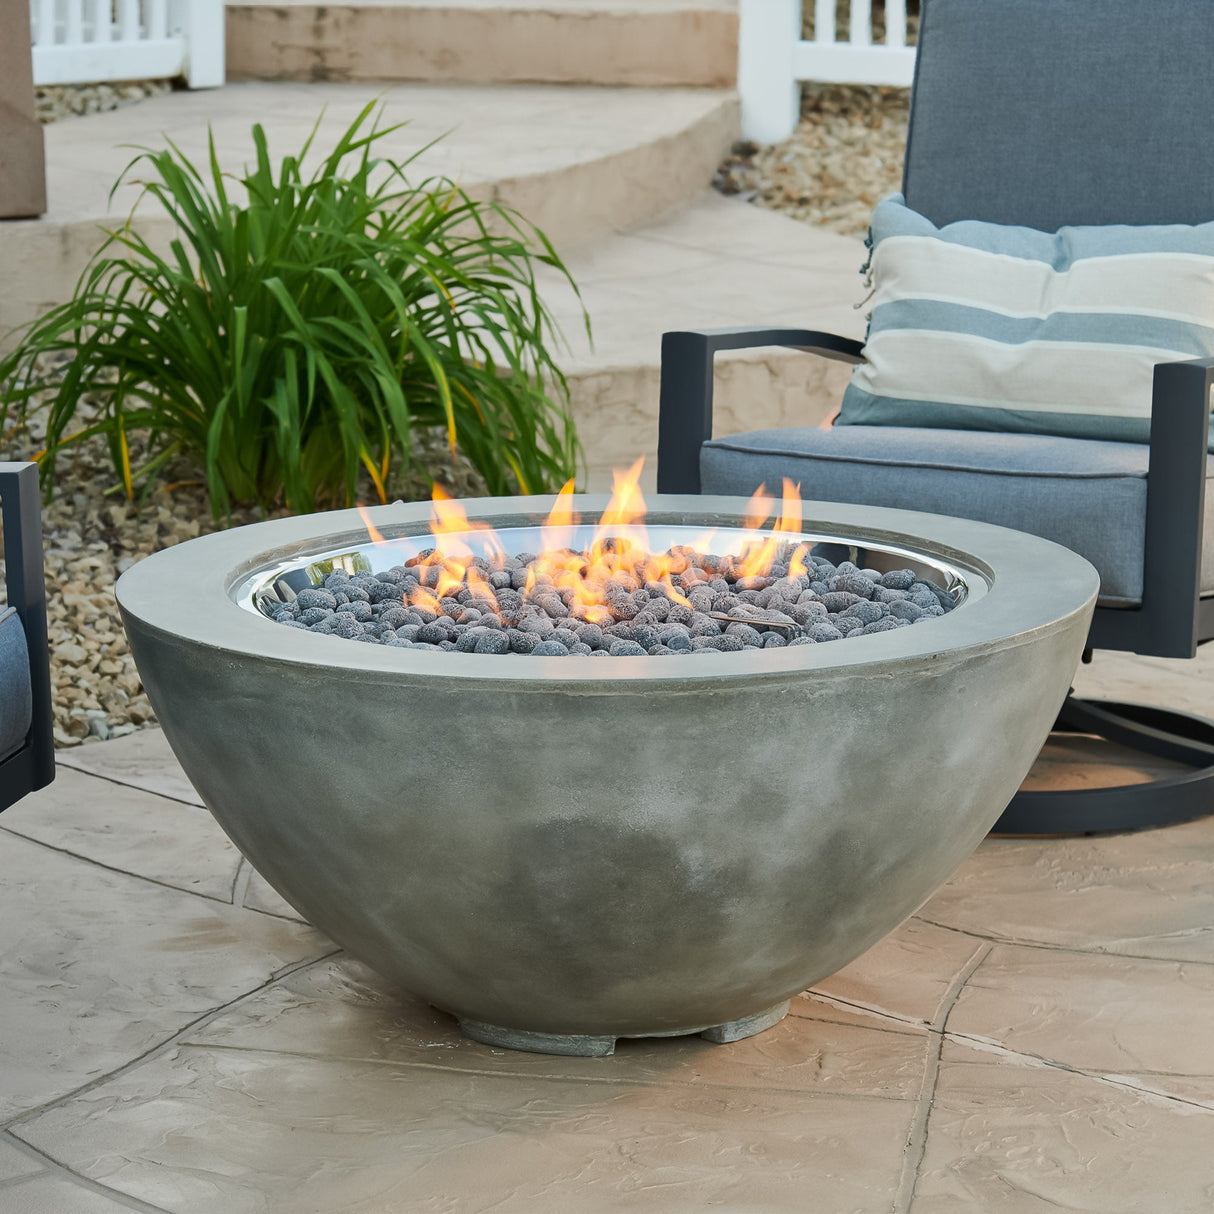 Lava Rocks covering the burner of a Natural Grey Cove Round Gas Fire Pit Bowl 42"